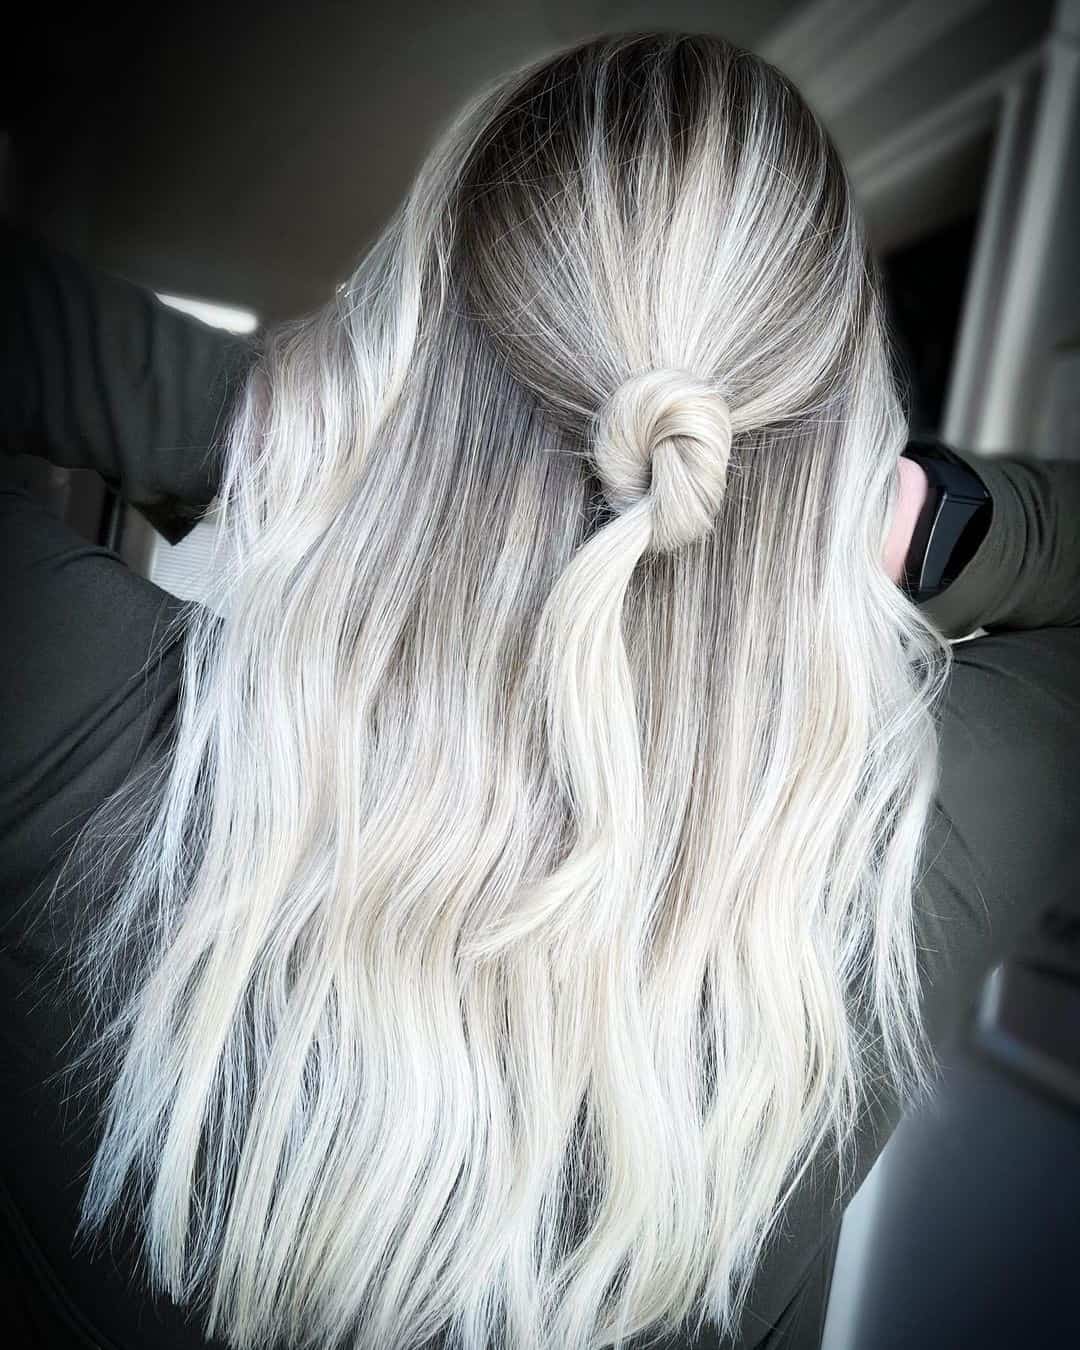 Icy Blonde Dramatic Highlights On Black Hair